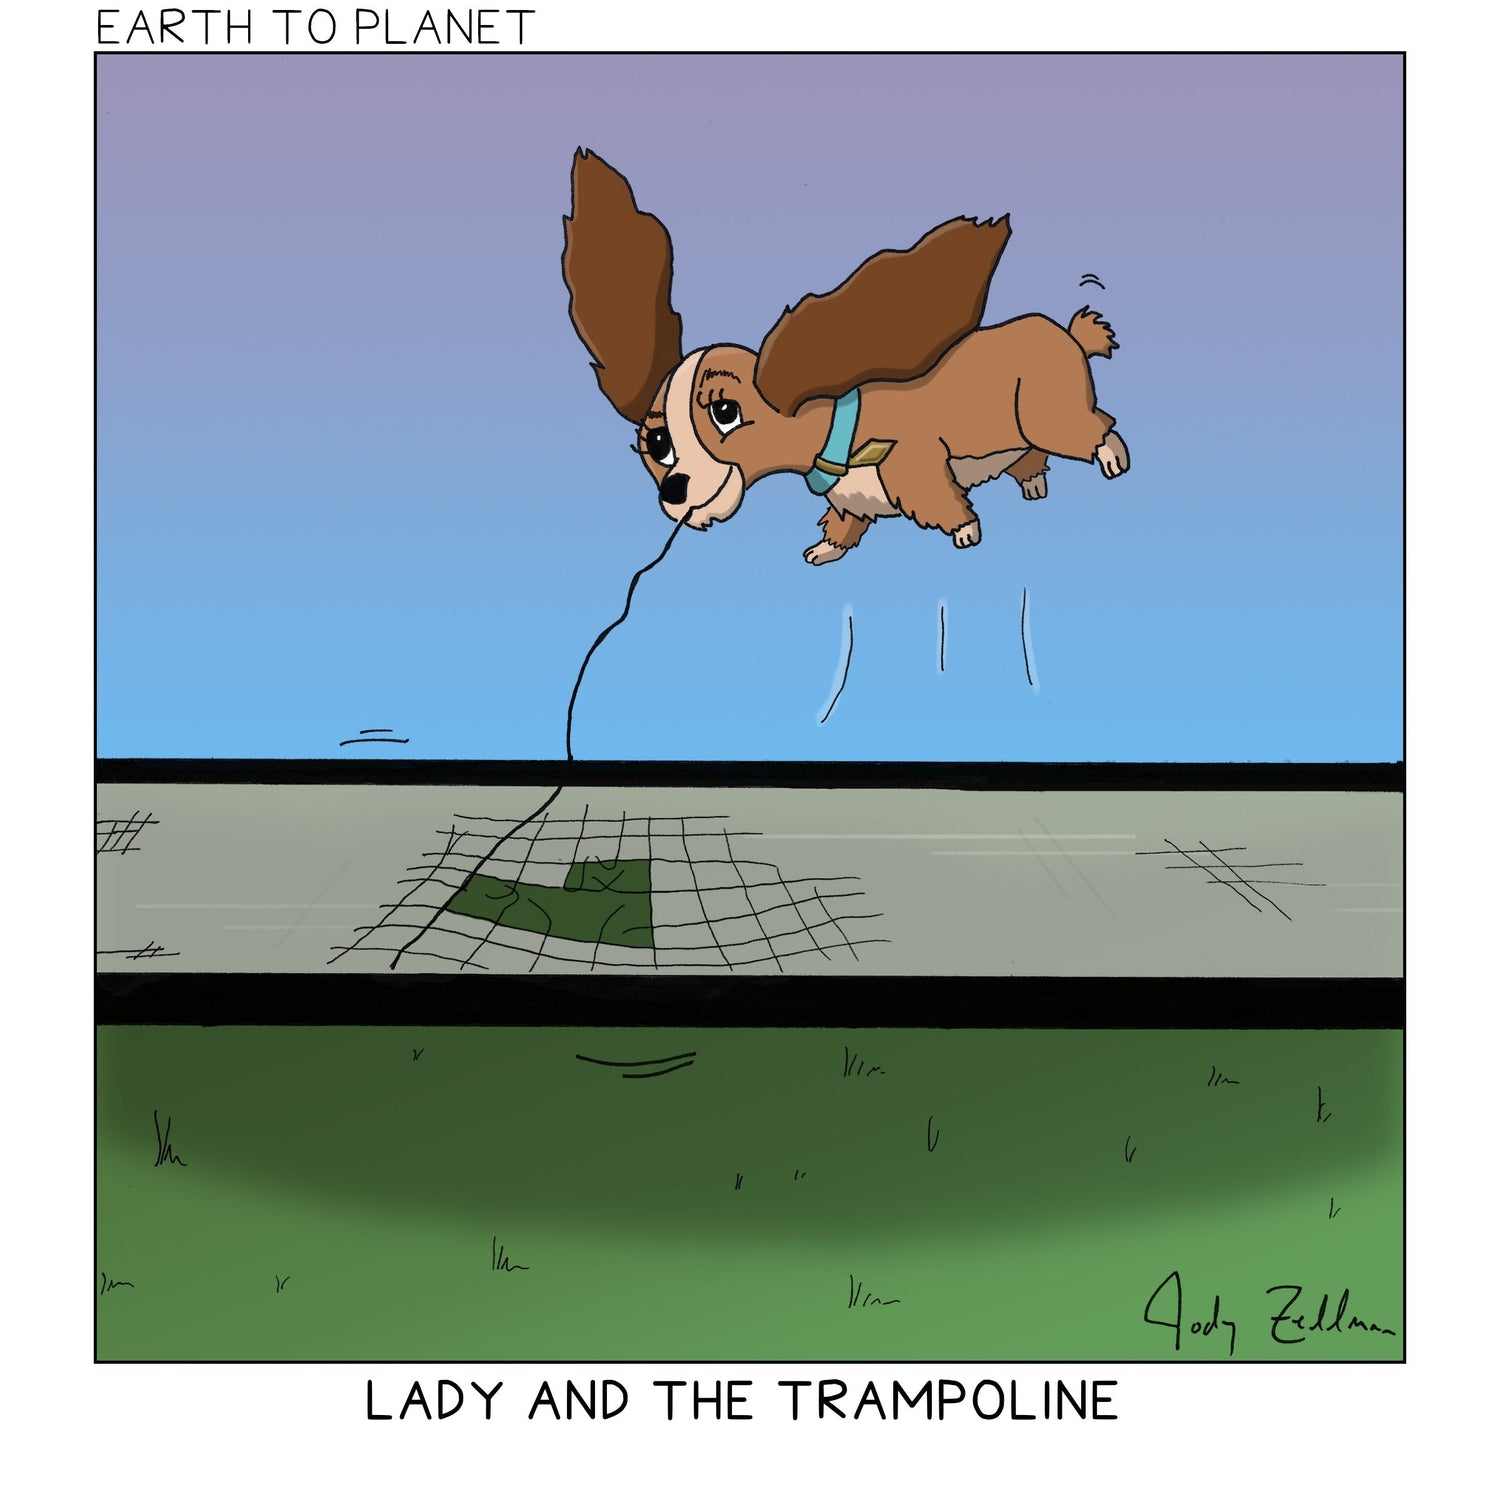 Lady and the Trampoline Cartoon